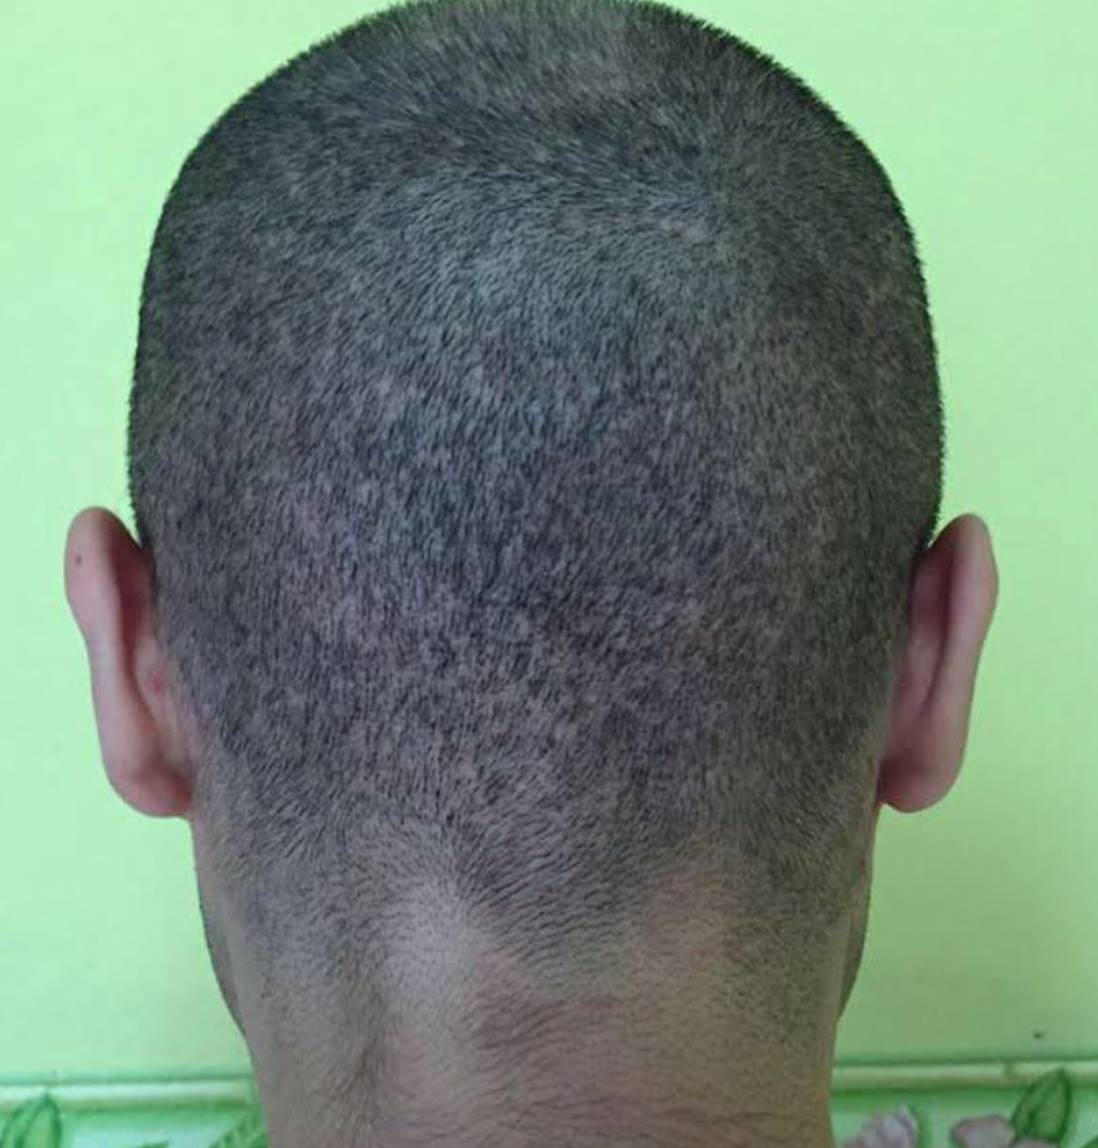 Result of scalp pigmentation after botched FUE hair transplant in Turkey